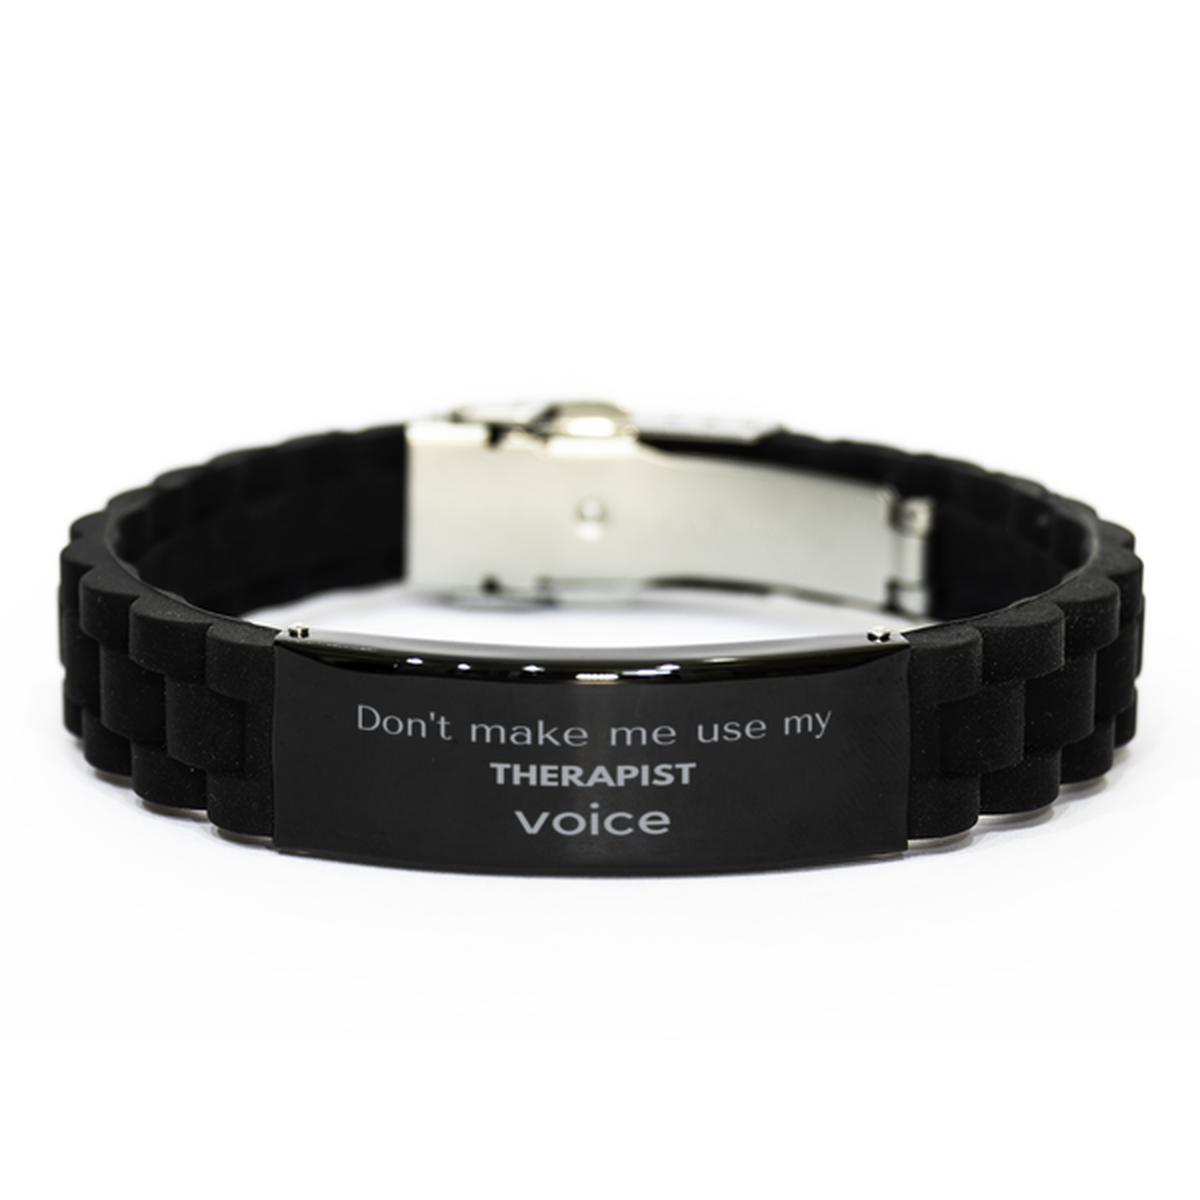 Don't make me use my Therapist voice, Sarcasm Therapist Gifts, Christmas Therapist Black Glidelock Clasp Bracelet Birthday Unique Gifts For Therapist Coworkers, Men, Women, Colleague, Friends